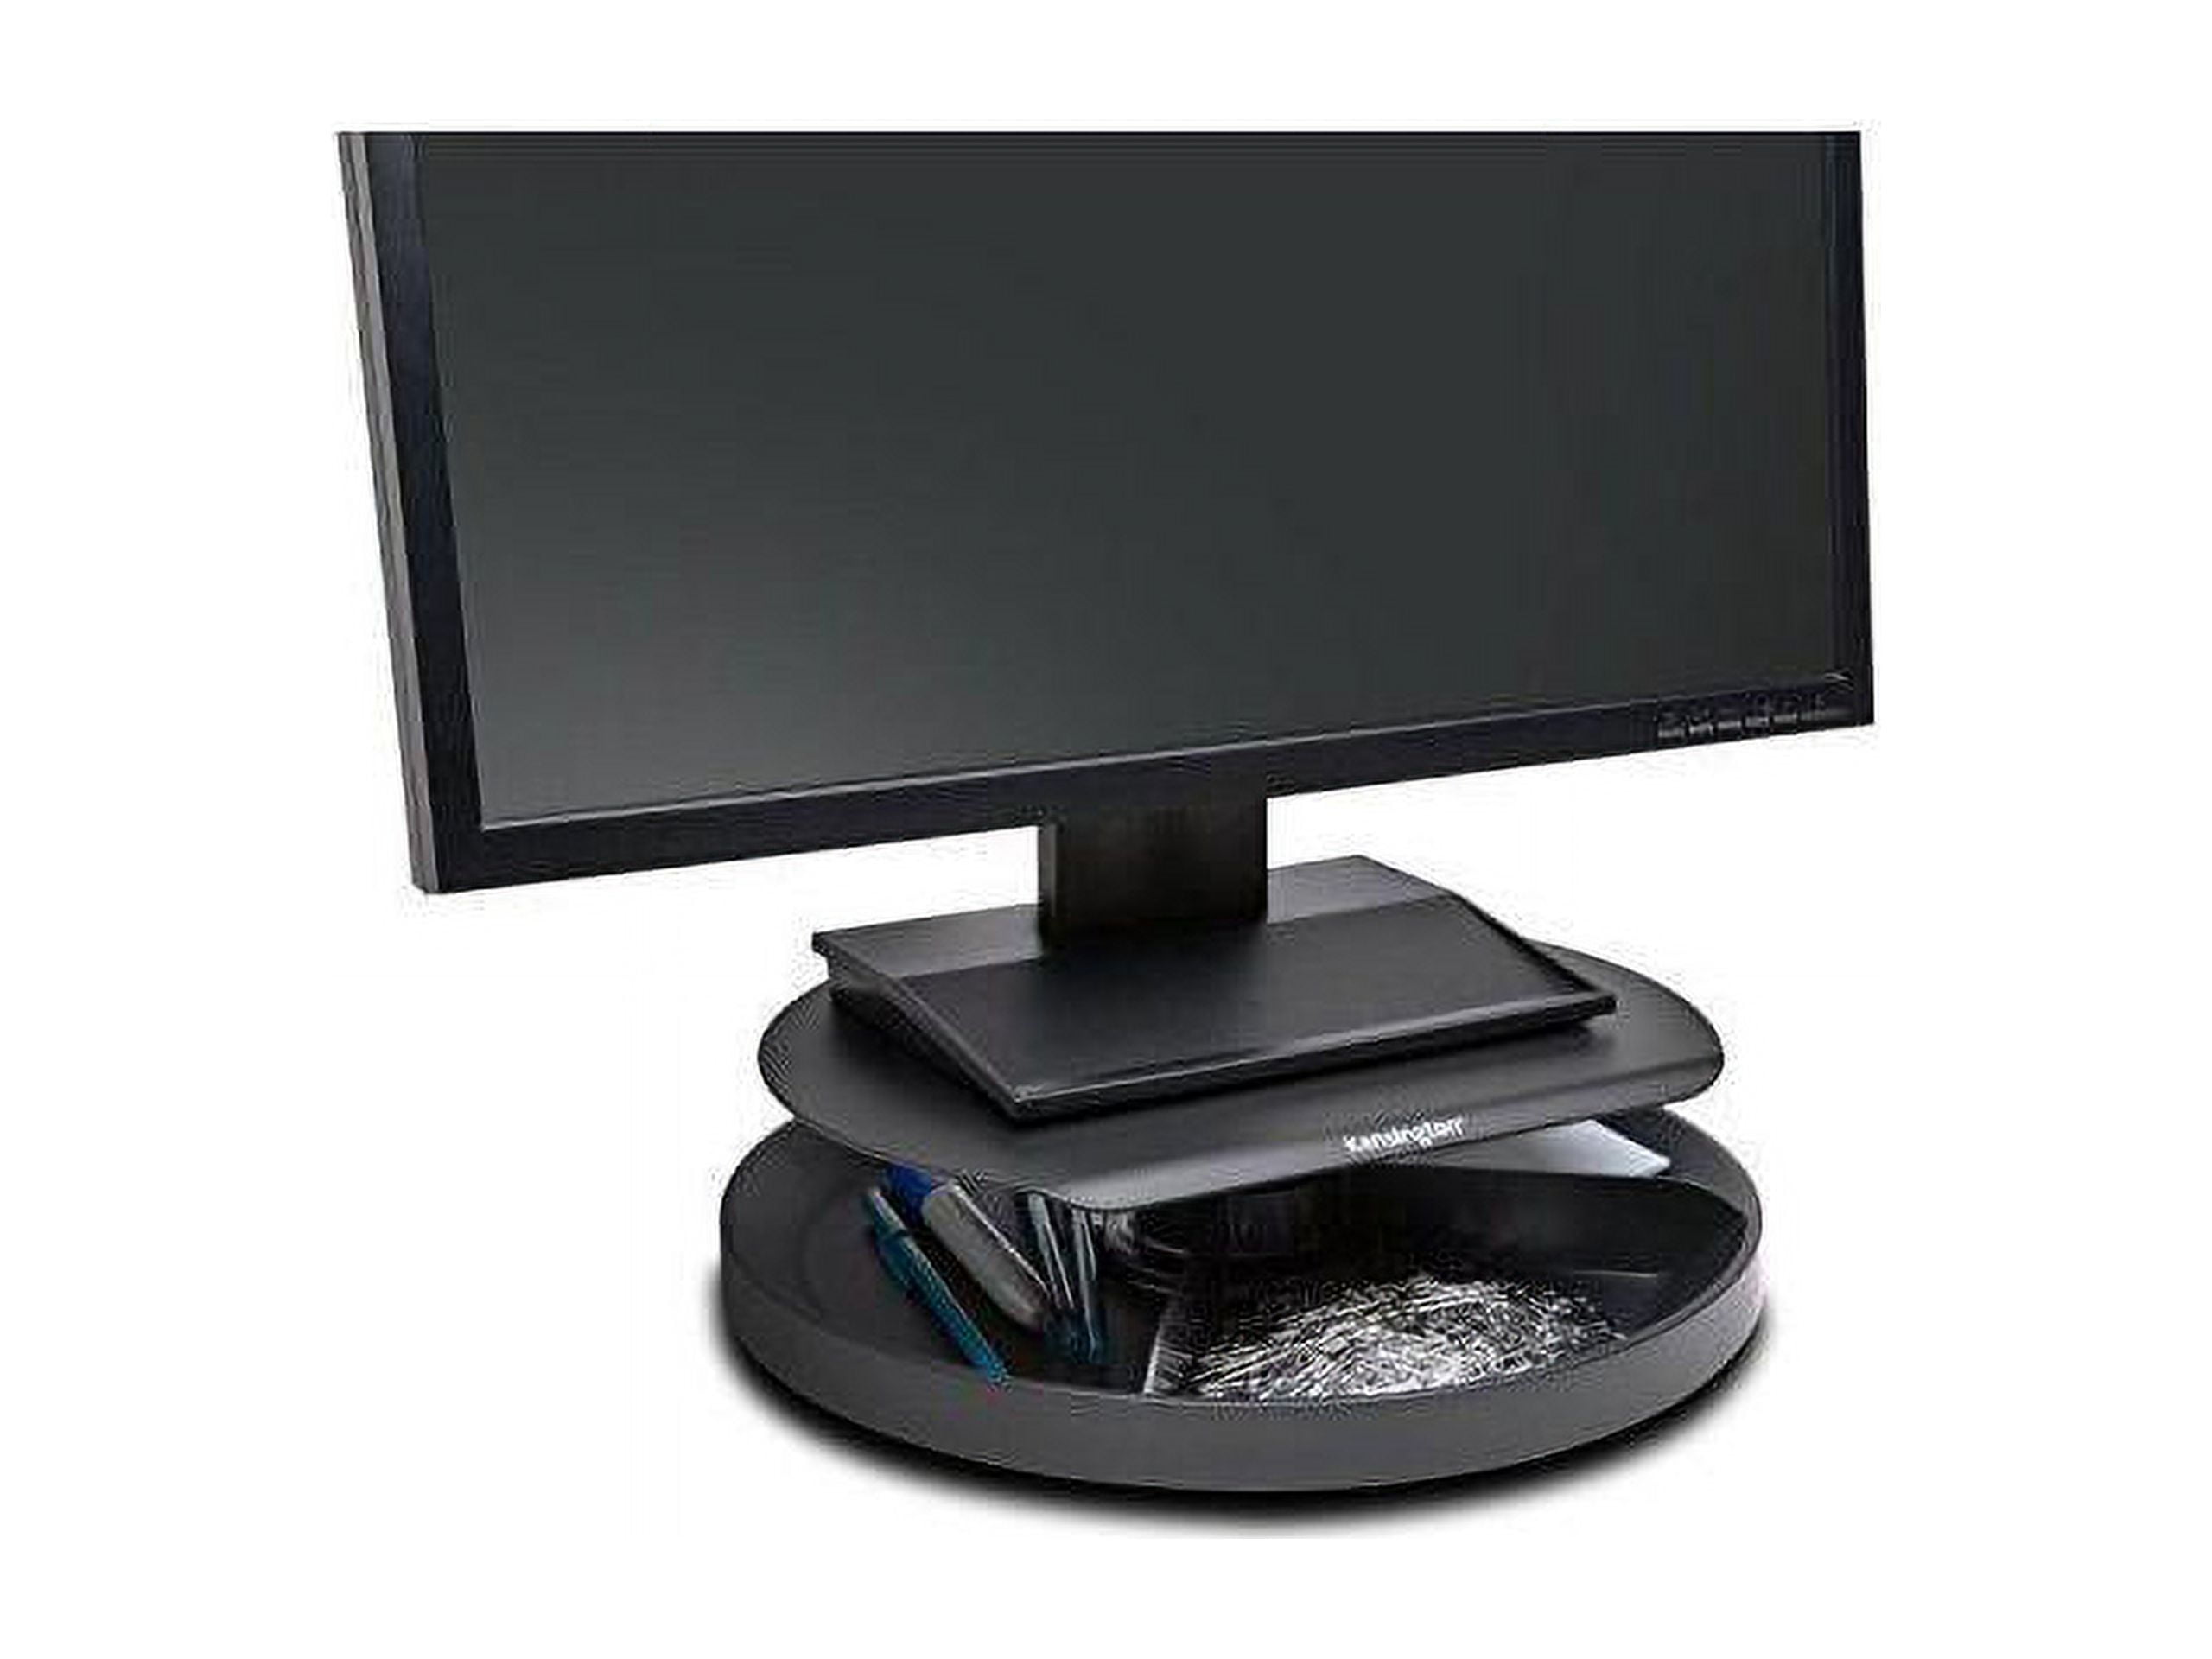 Picture of Kensington K52787WW SmartFit Spin 2 Monitor Stand, Black - Pack of 3